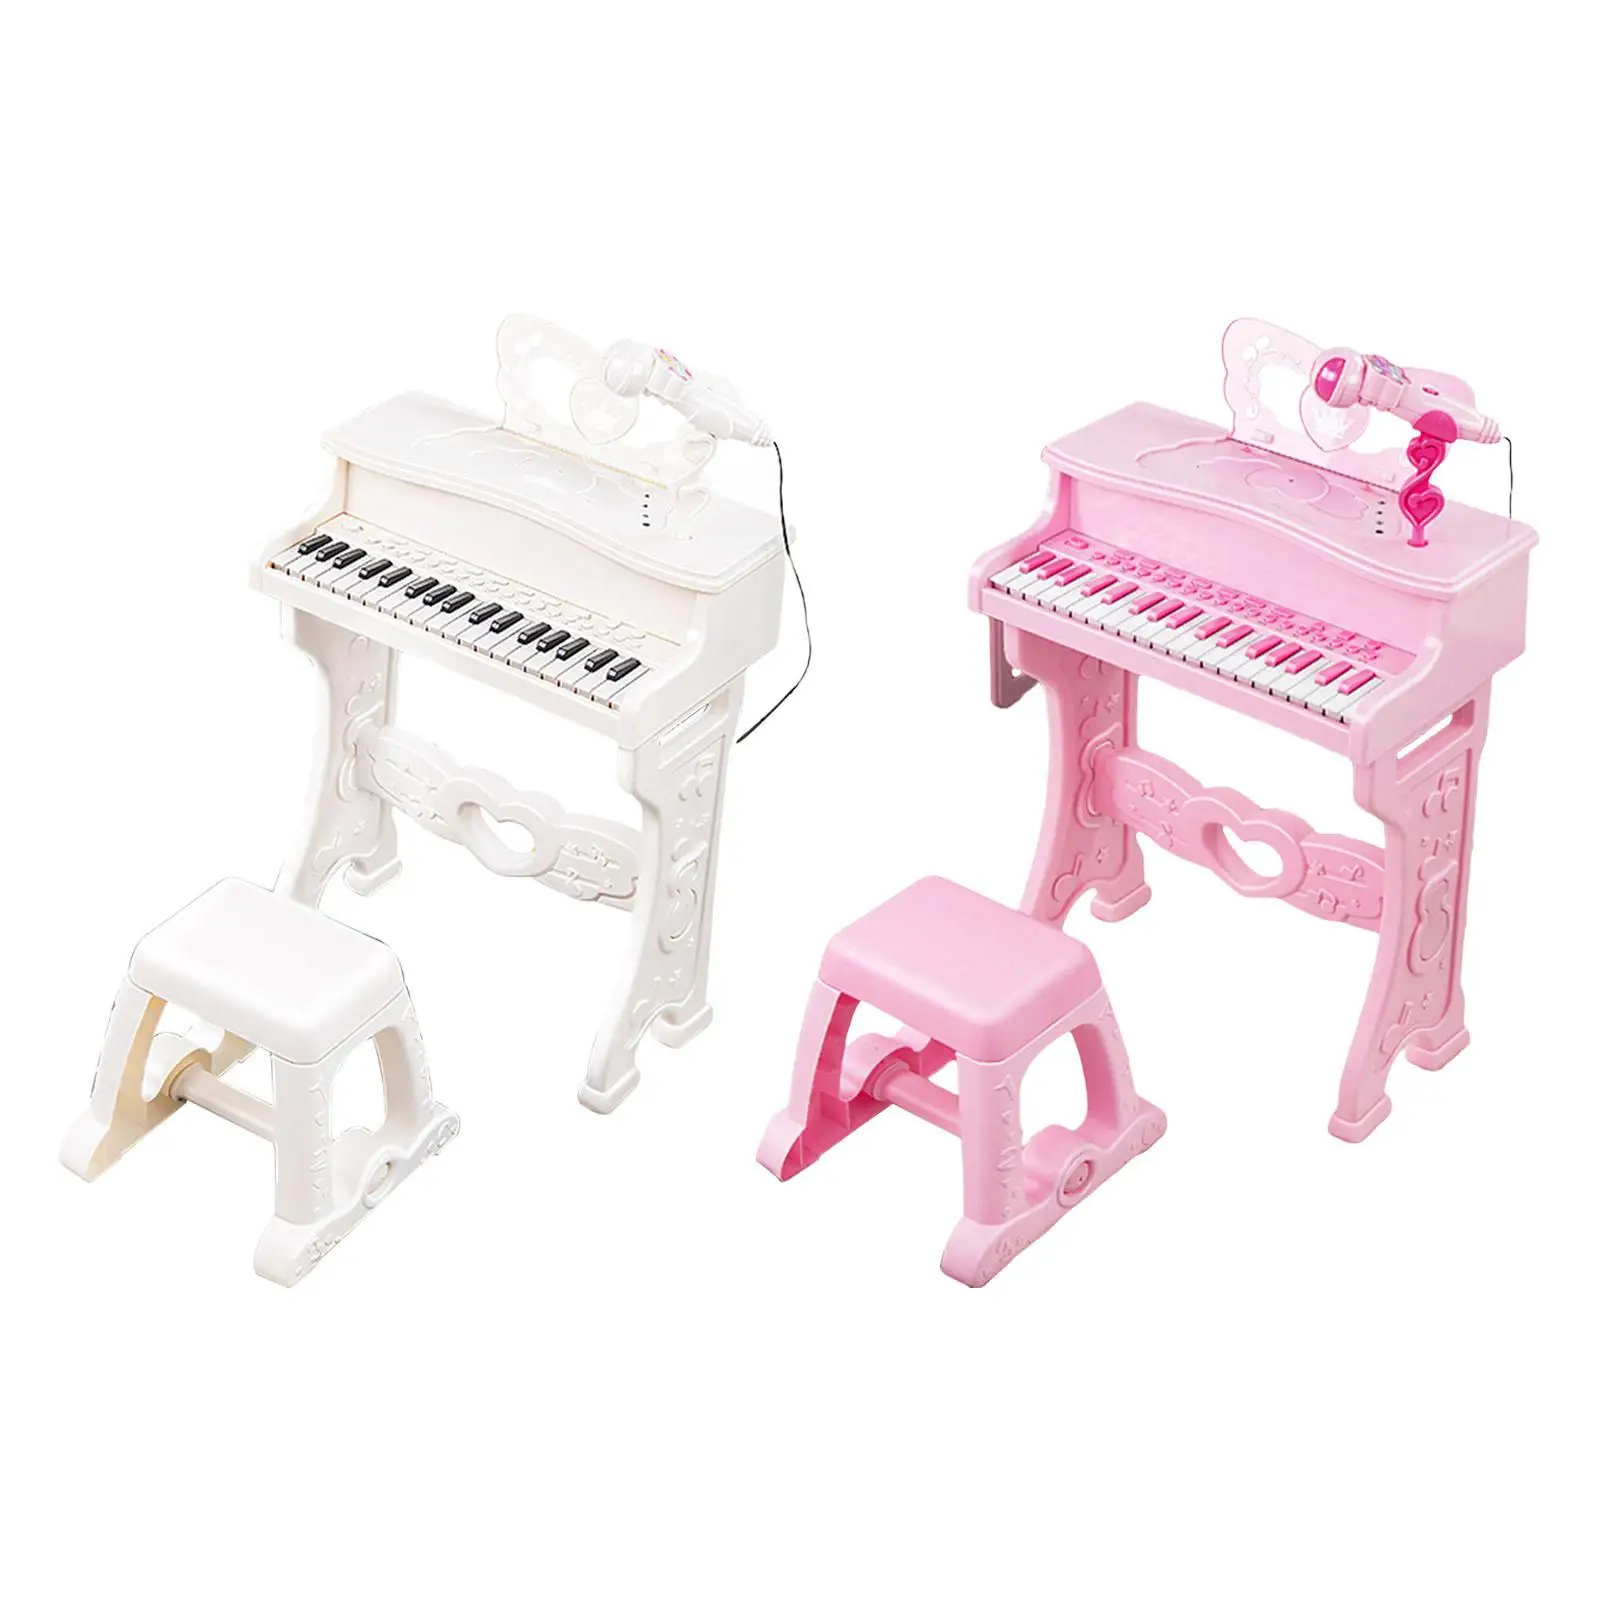 Multifunctional Keyboard Learning Toy and Stool Musical Instrument 37 Key Electronic Piano for Girls Boys Toddler Kids Baby